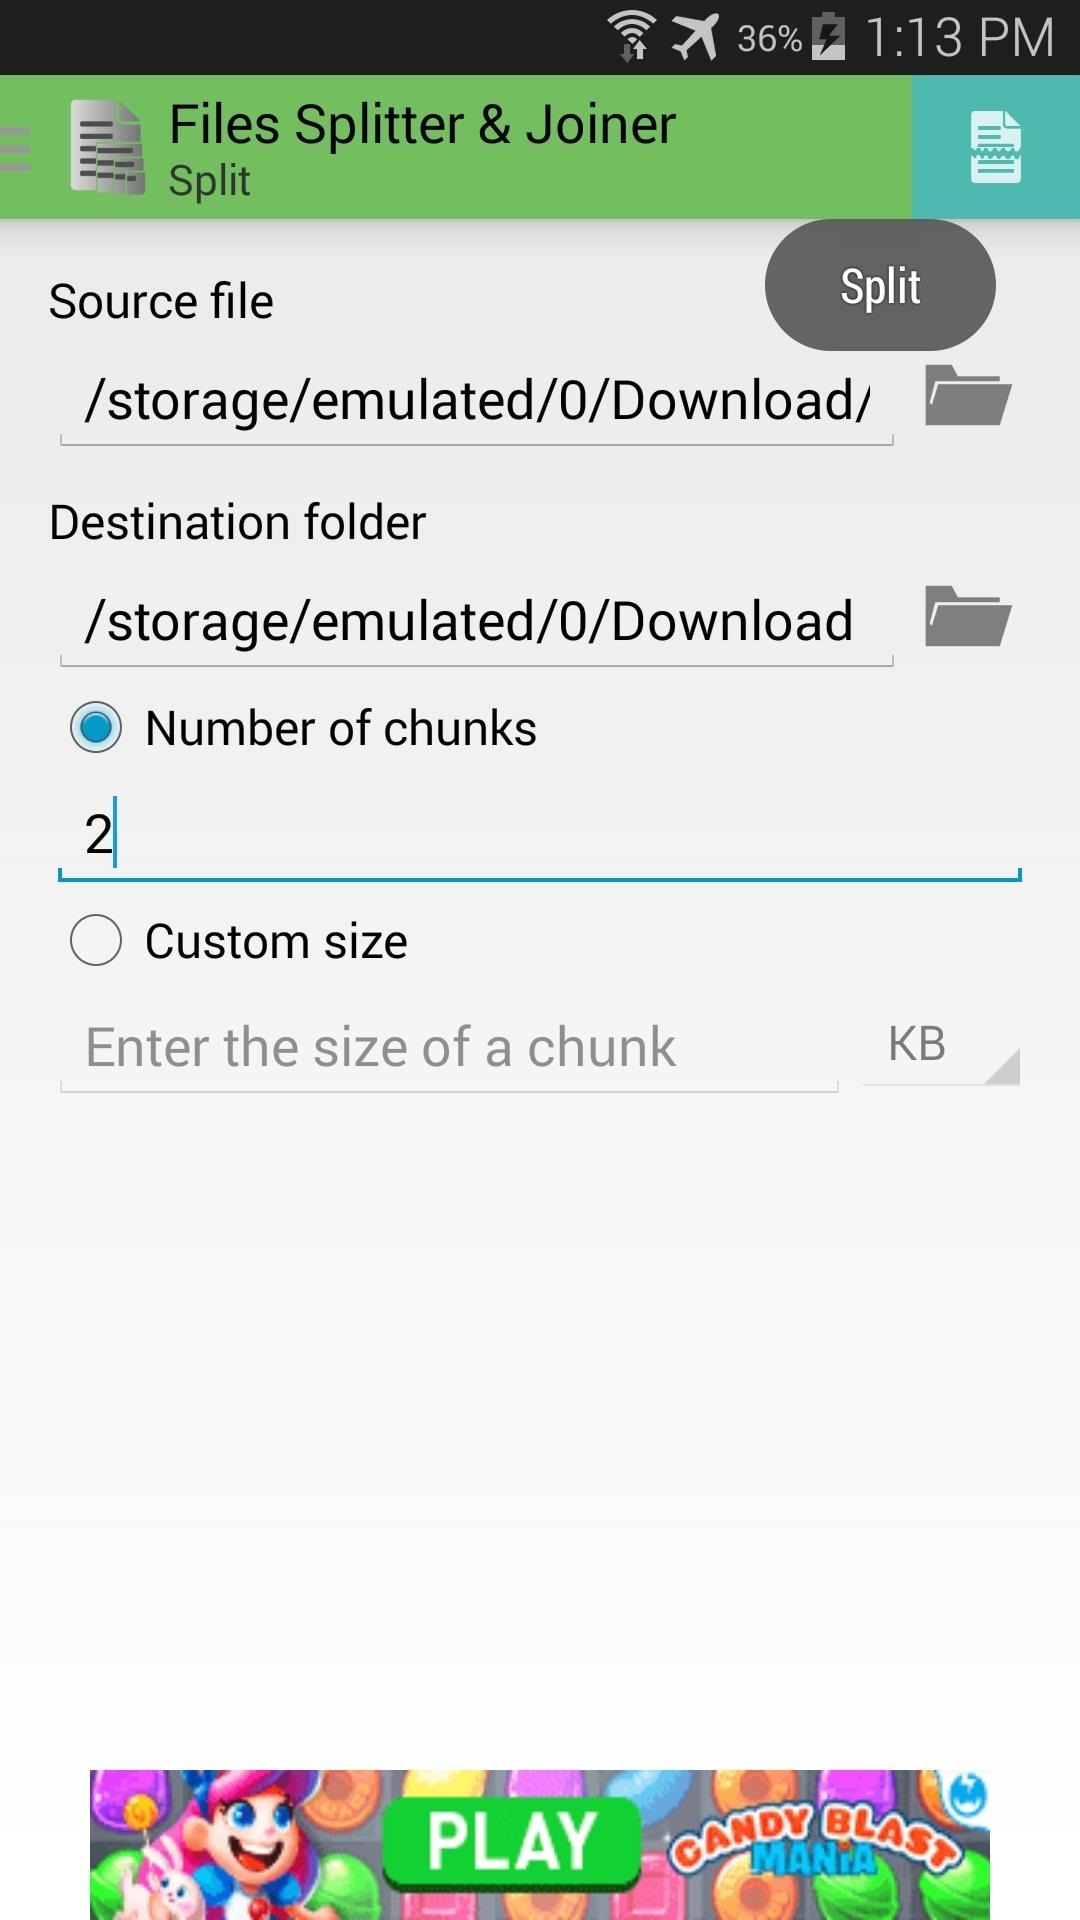 How to Split Large Files for Easy Sharing on Your Nexus 5 or Other Android Device